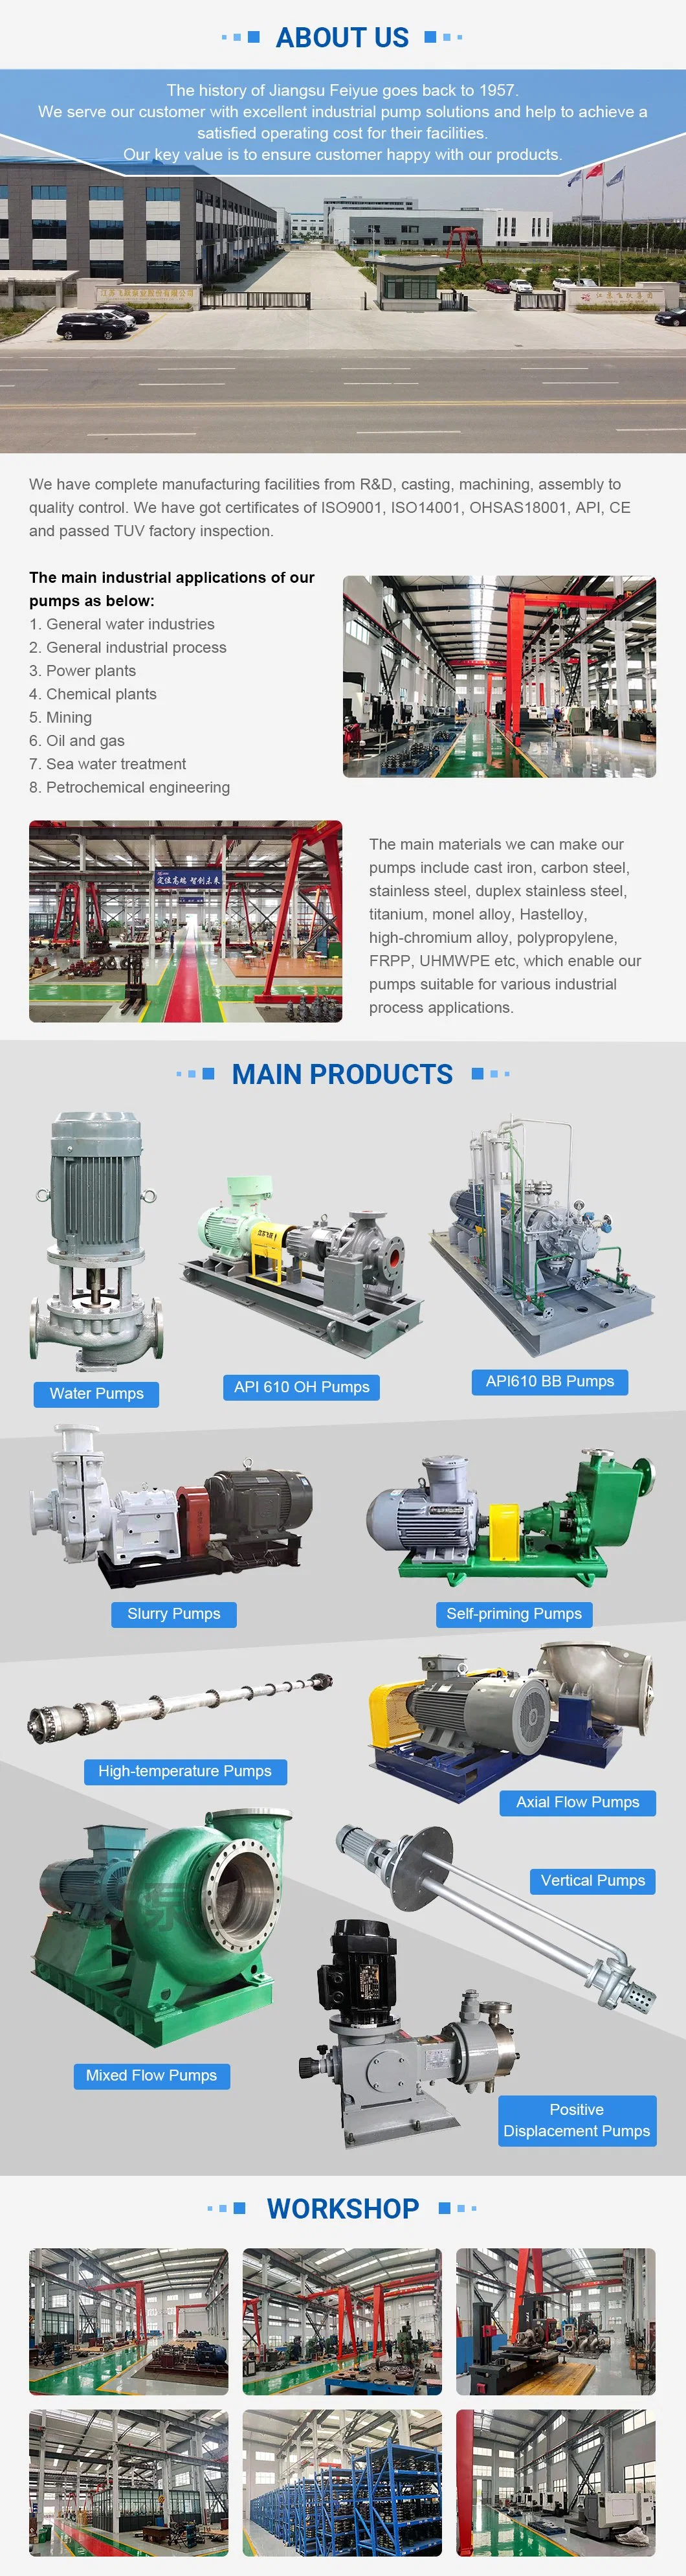 Ihf Fluorine Plastic Chemical Process Pump for Transfer Organic Solvents